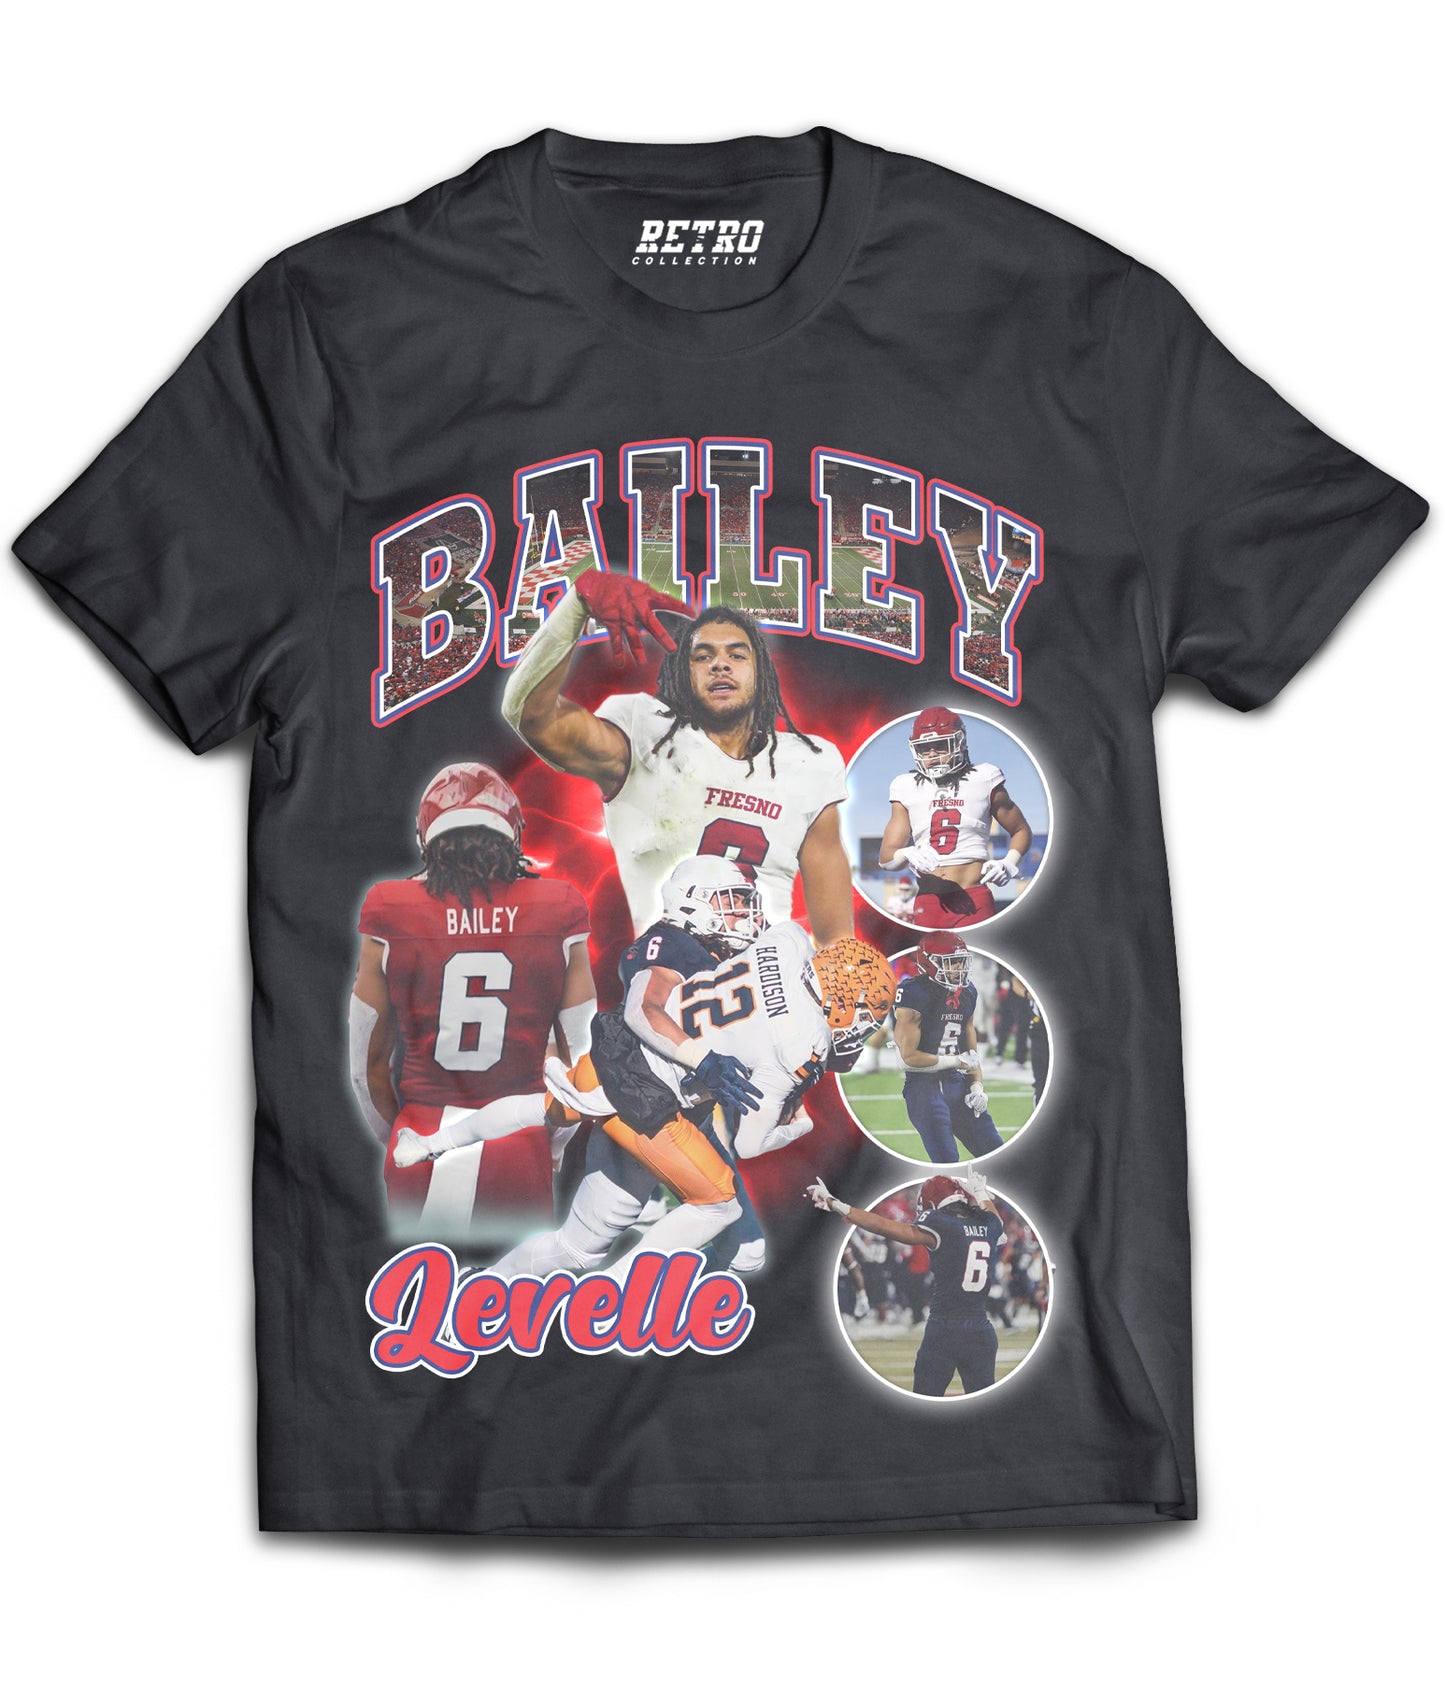 Levelle Bailey "DROP 1" Tribute Shirt *LIMITED EDITION* (Black, Red, White)